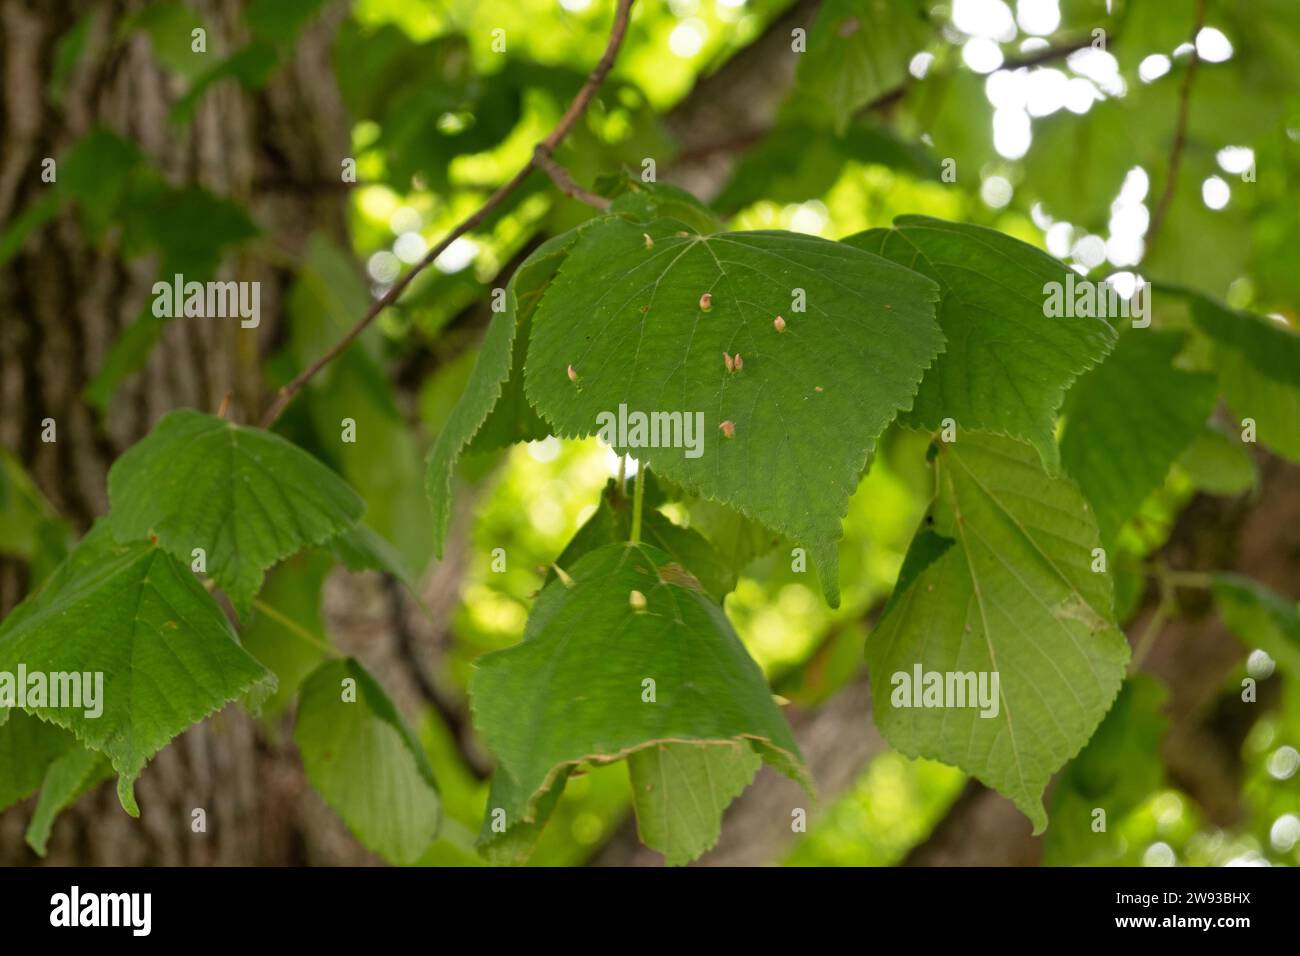 Spindle galls on Linden leaves (Tilia cordata) caused by Eriophyid tiliae mites. Stock Photo